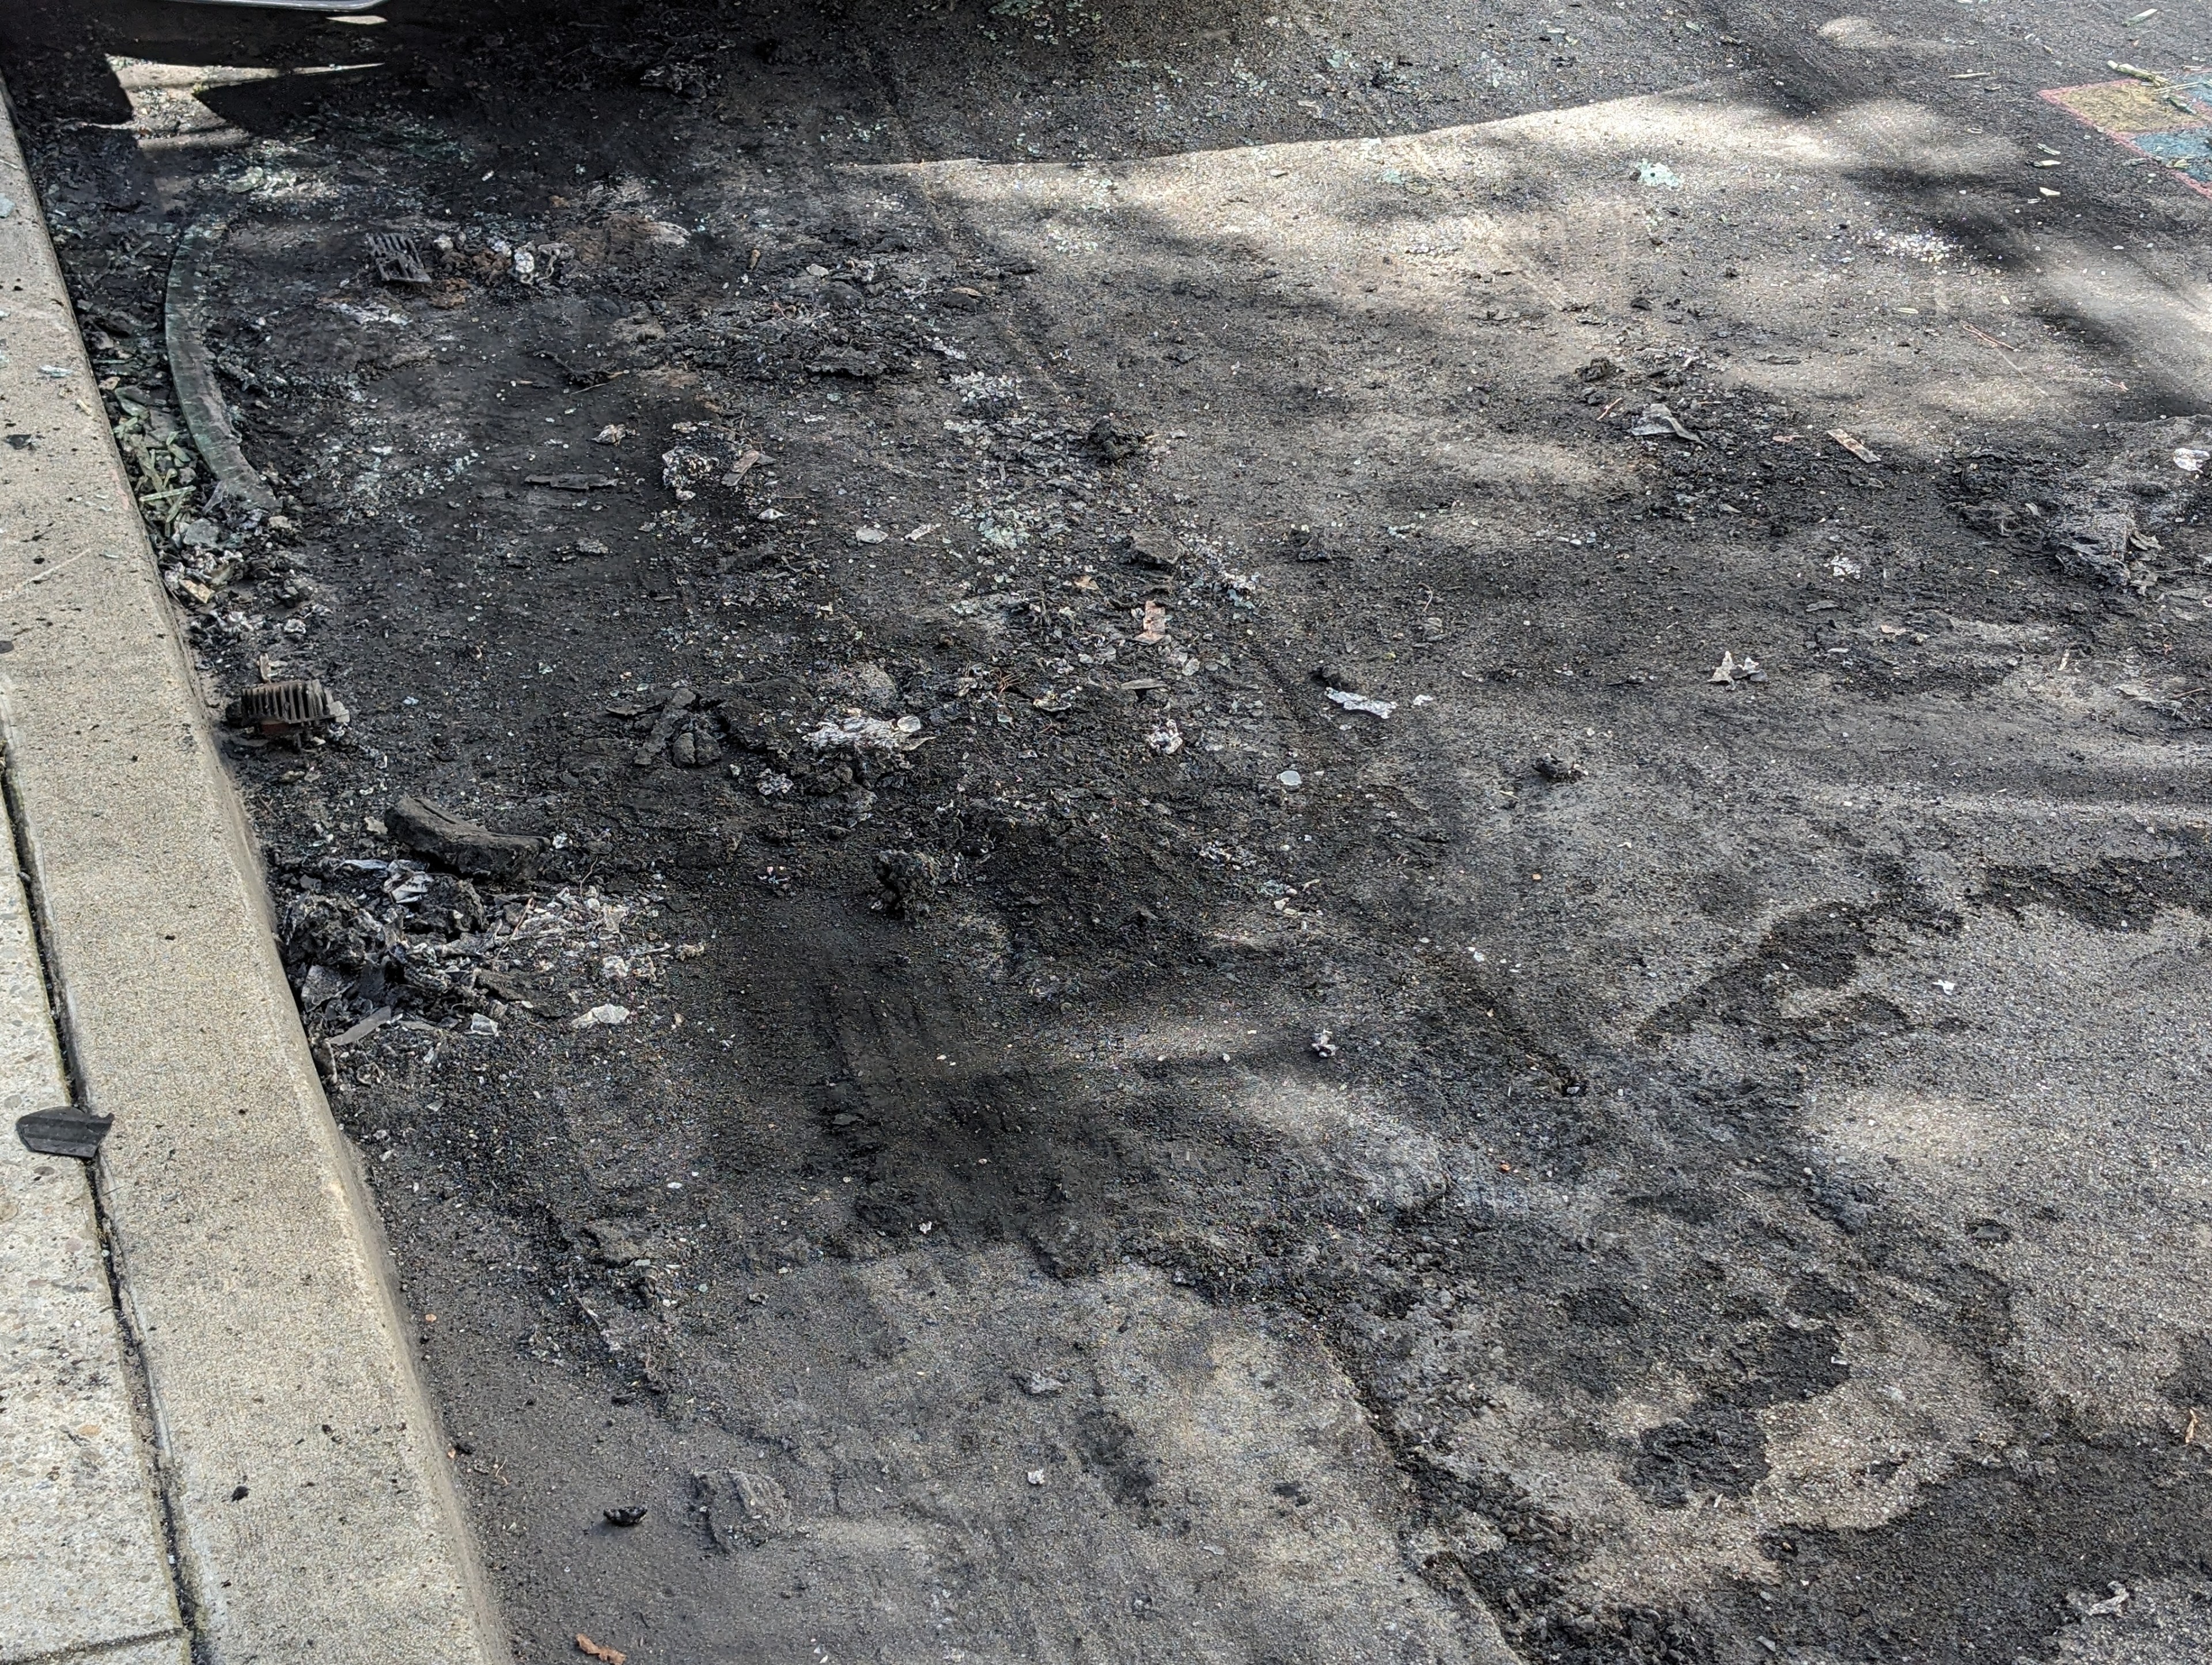 Charred ashes and vehicle parts remain in the roadway by a sidewalk curb.